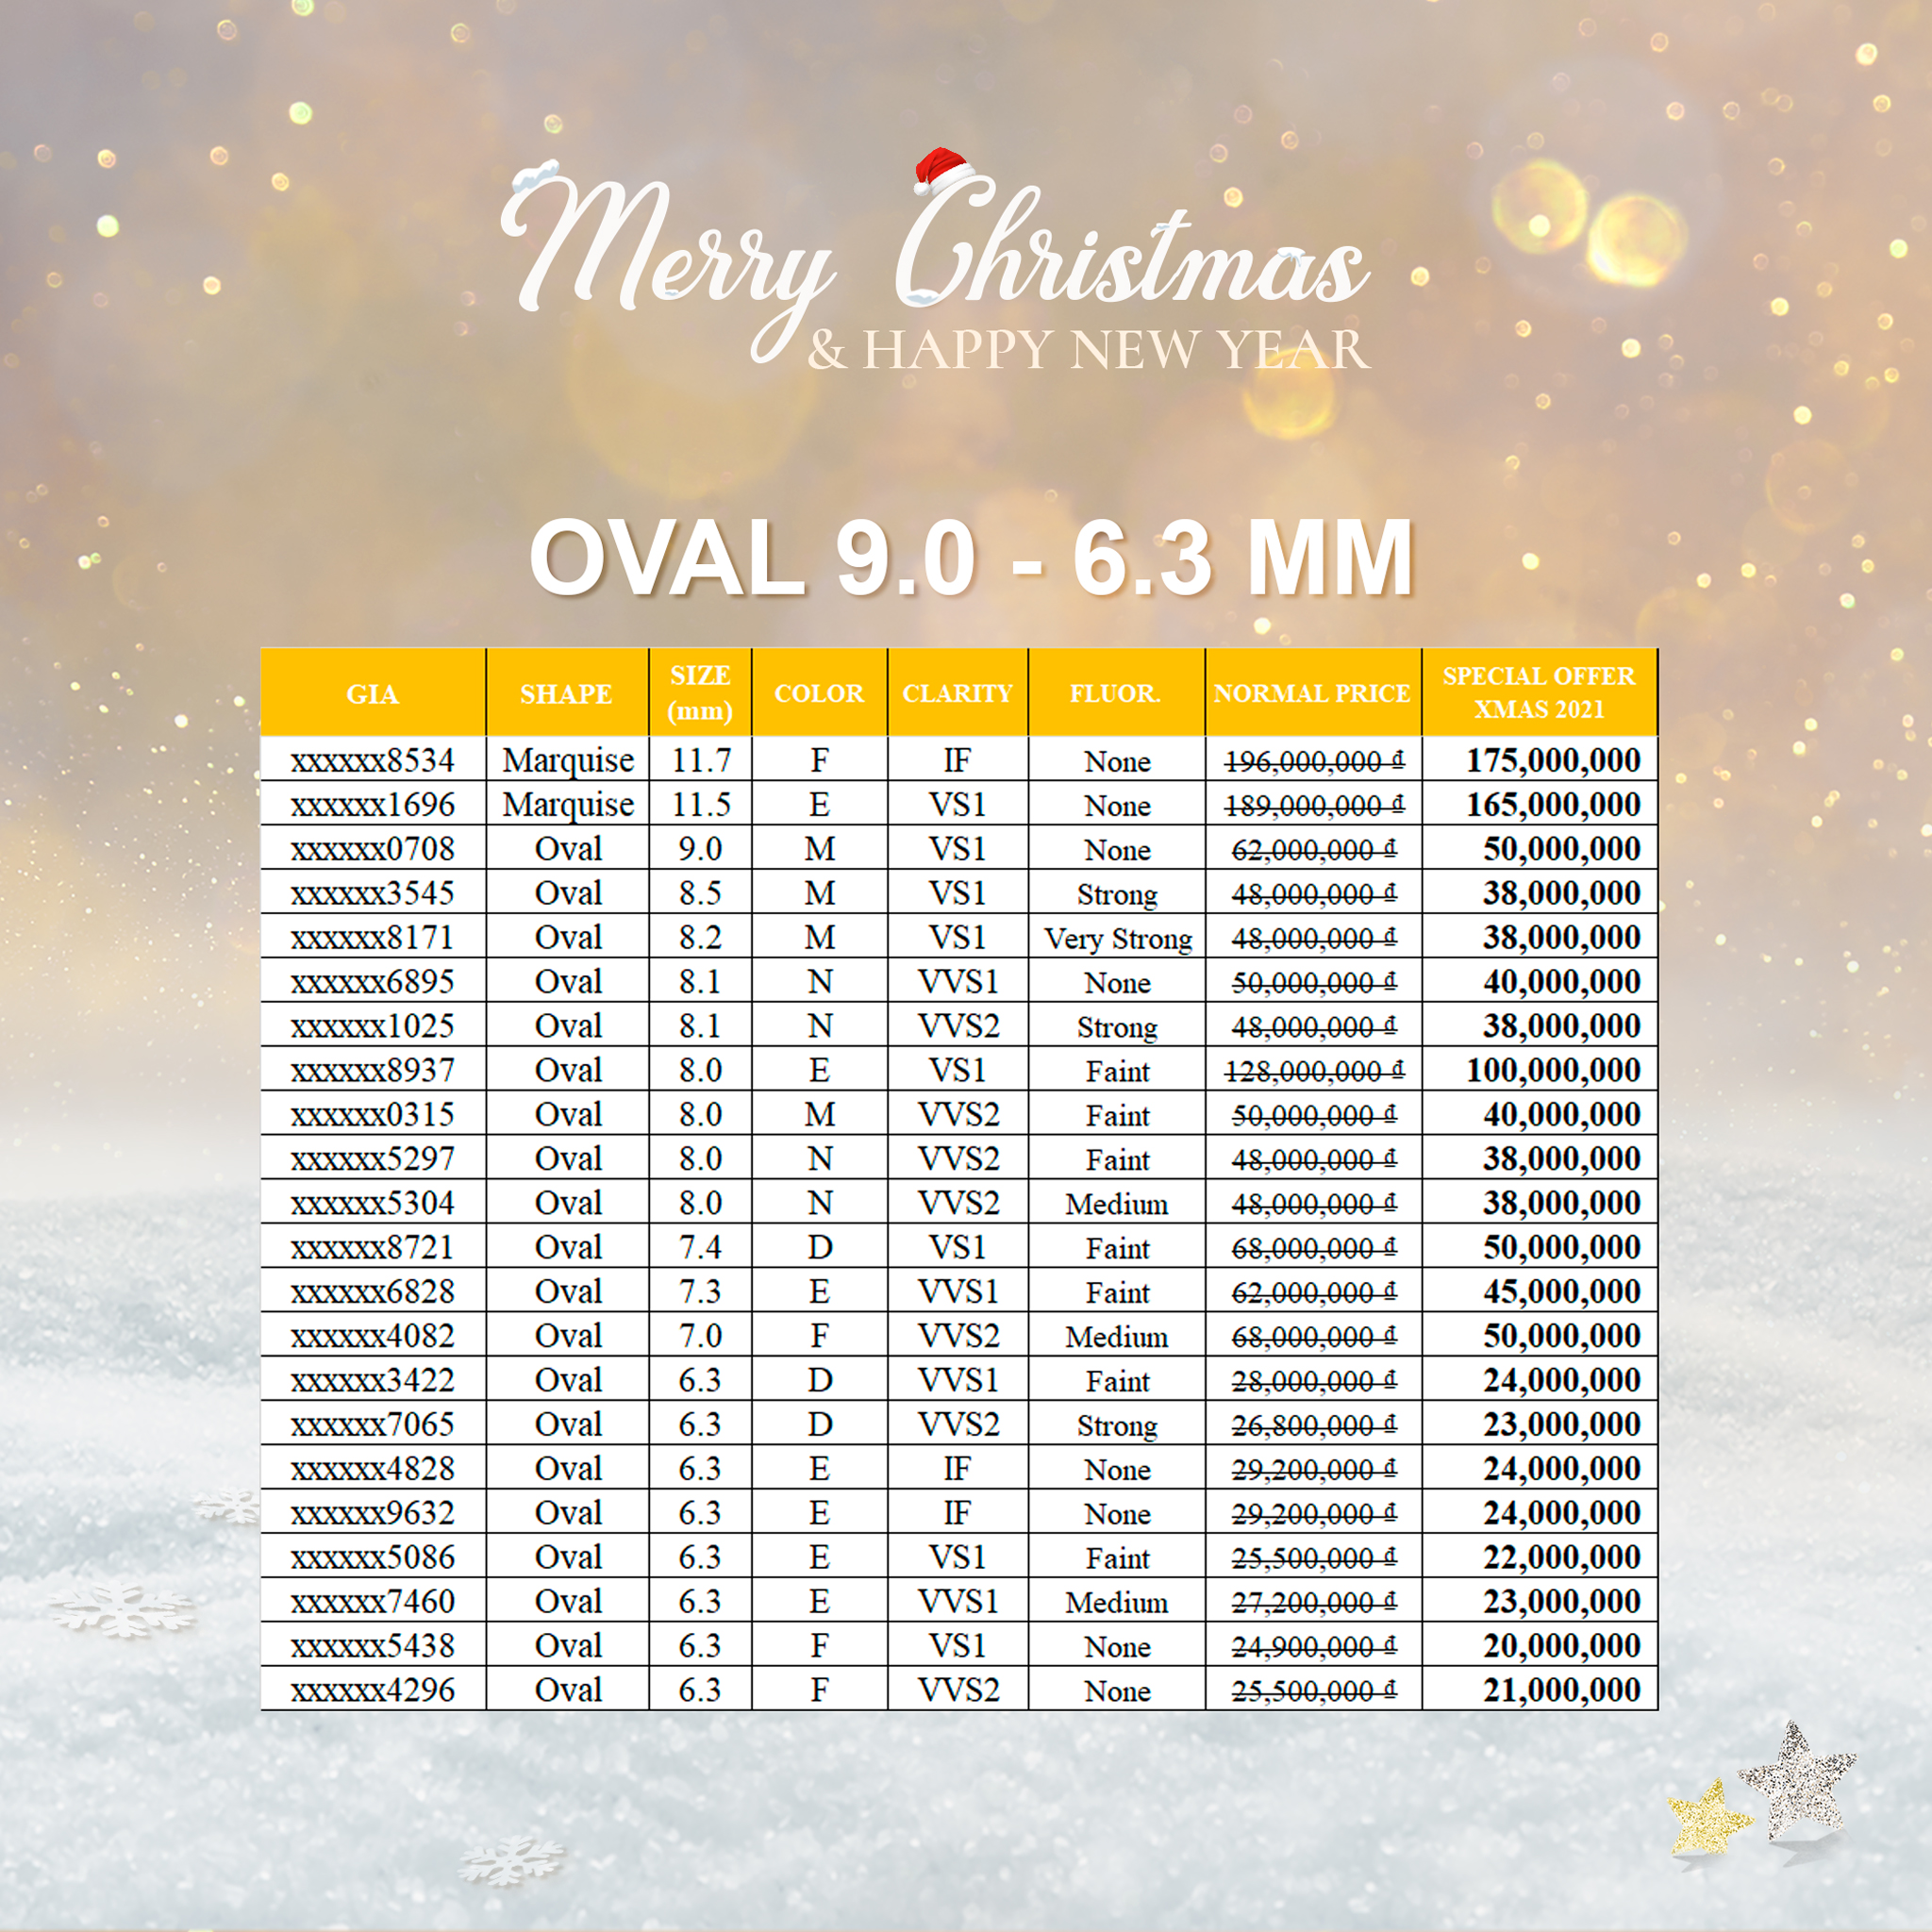 Diamond offer with a total value of over 2 billion VND - Celebrate Christmas and New Year in your style! - 8